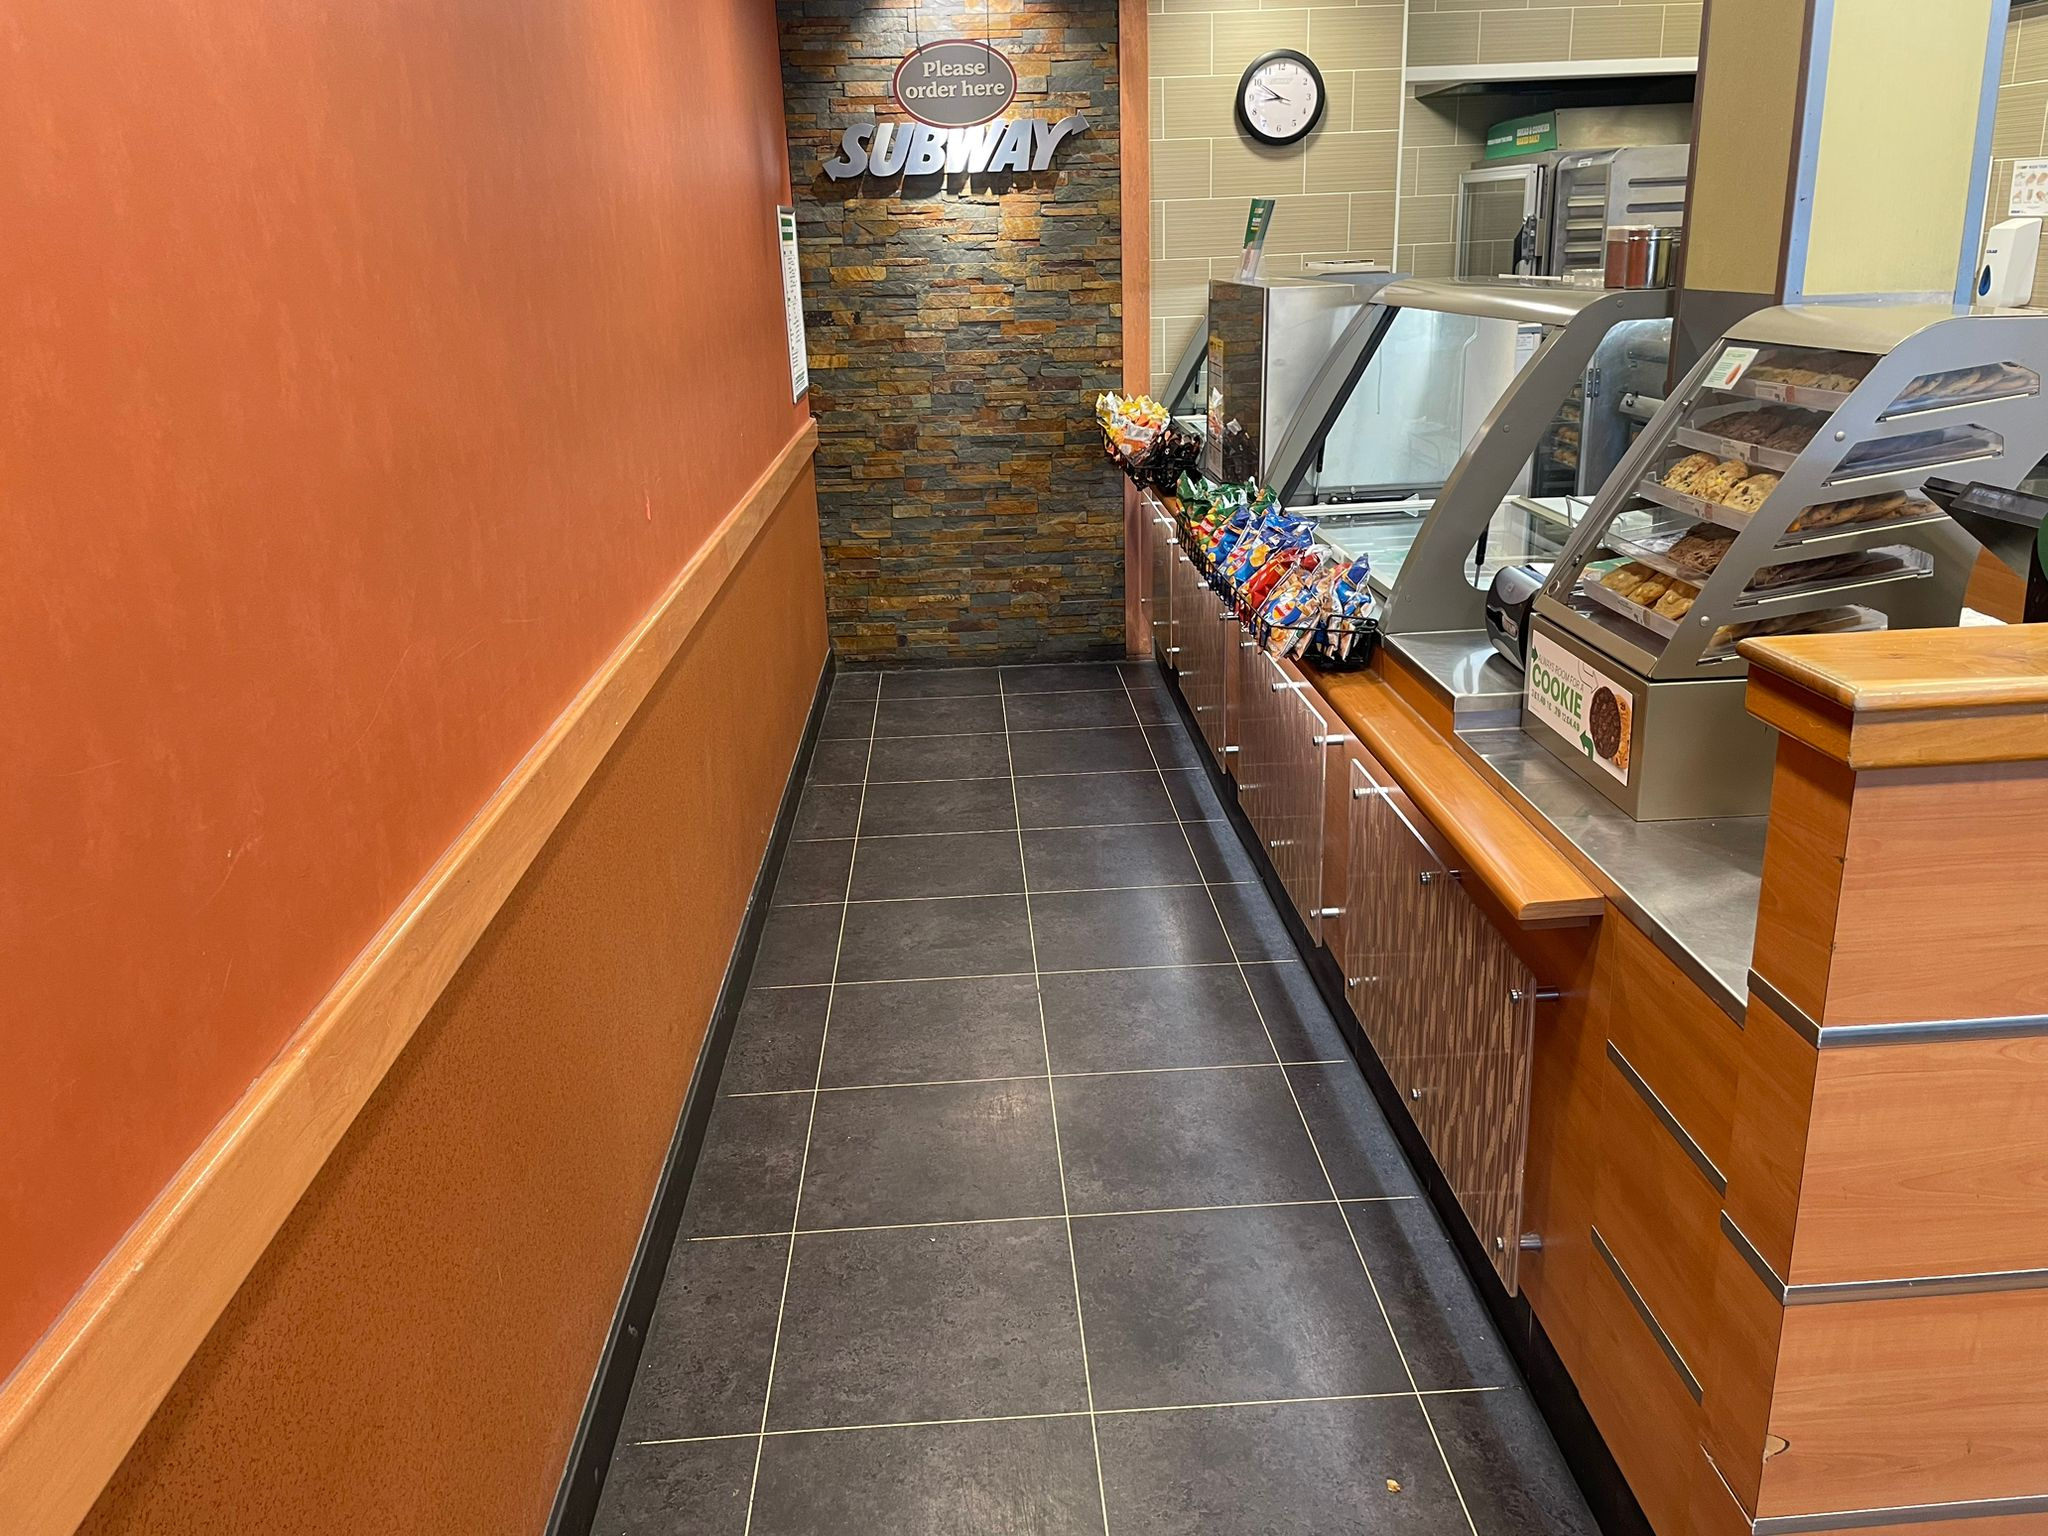 Incredible Subway franchise resale opportunity in West Sussex